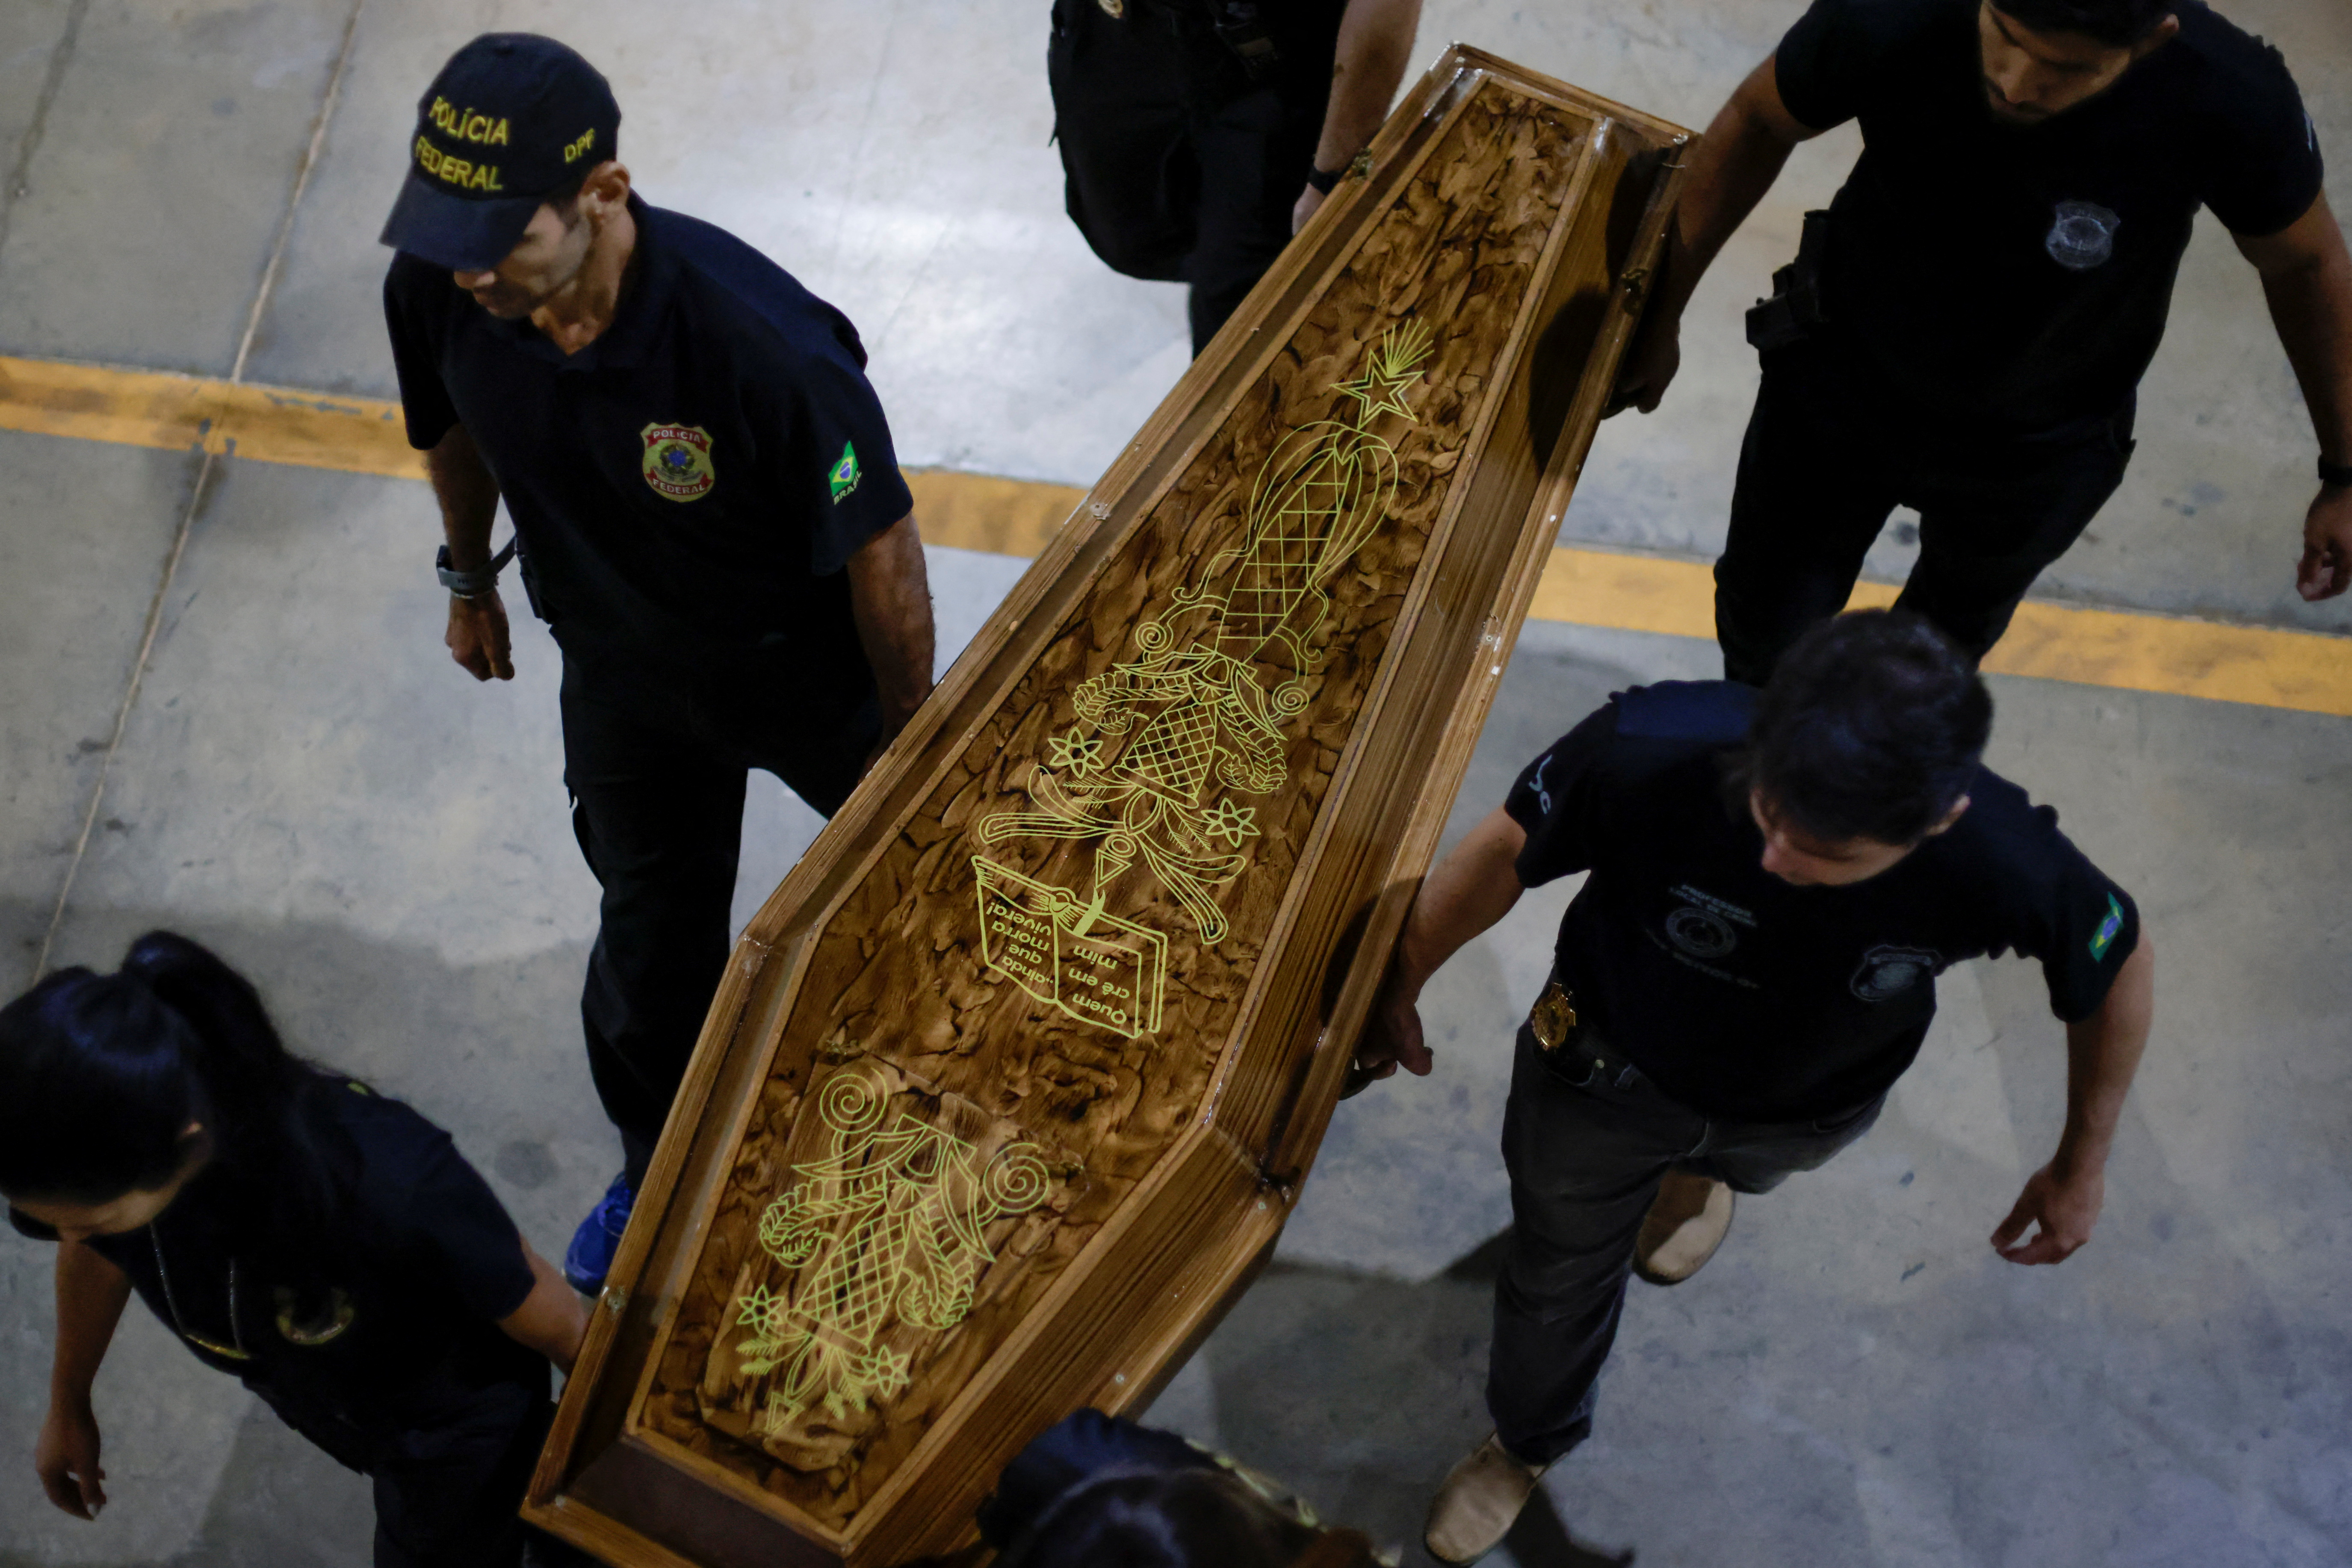 Federal police officers carry a coffin containing human remains after a suspect confessed to the murders of British journalist Dom Phillips and Brazilian indigenous expert Bruno Pereira, in Brasilia